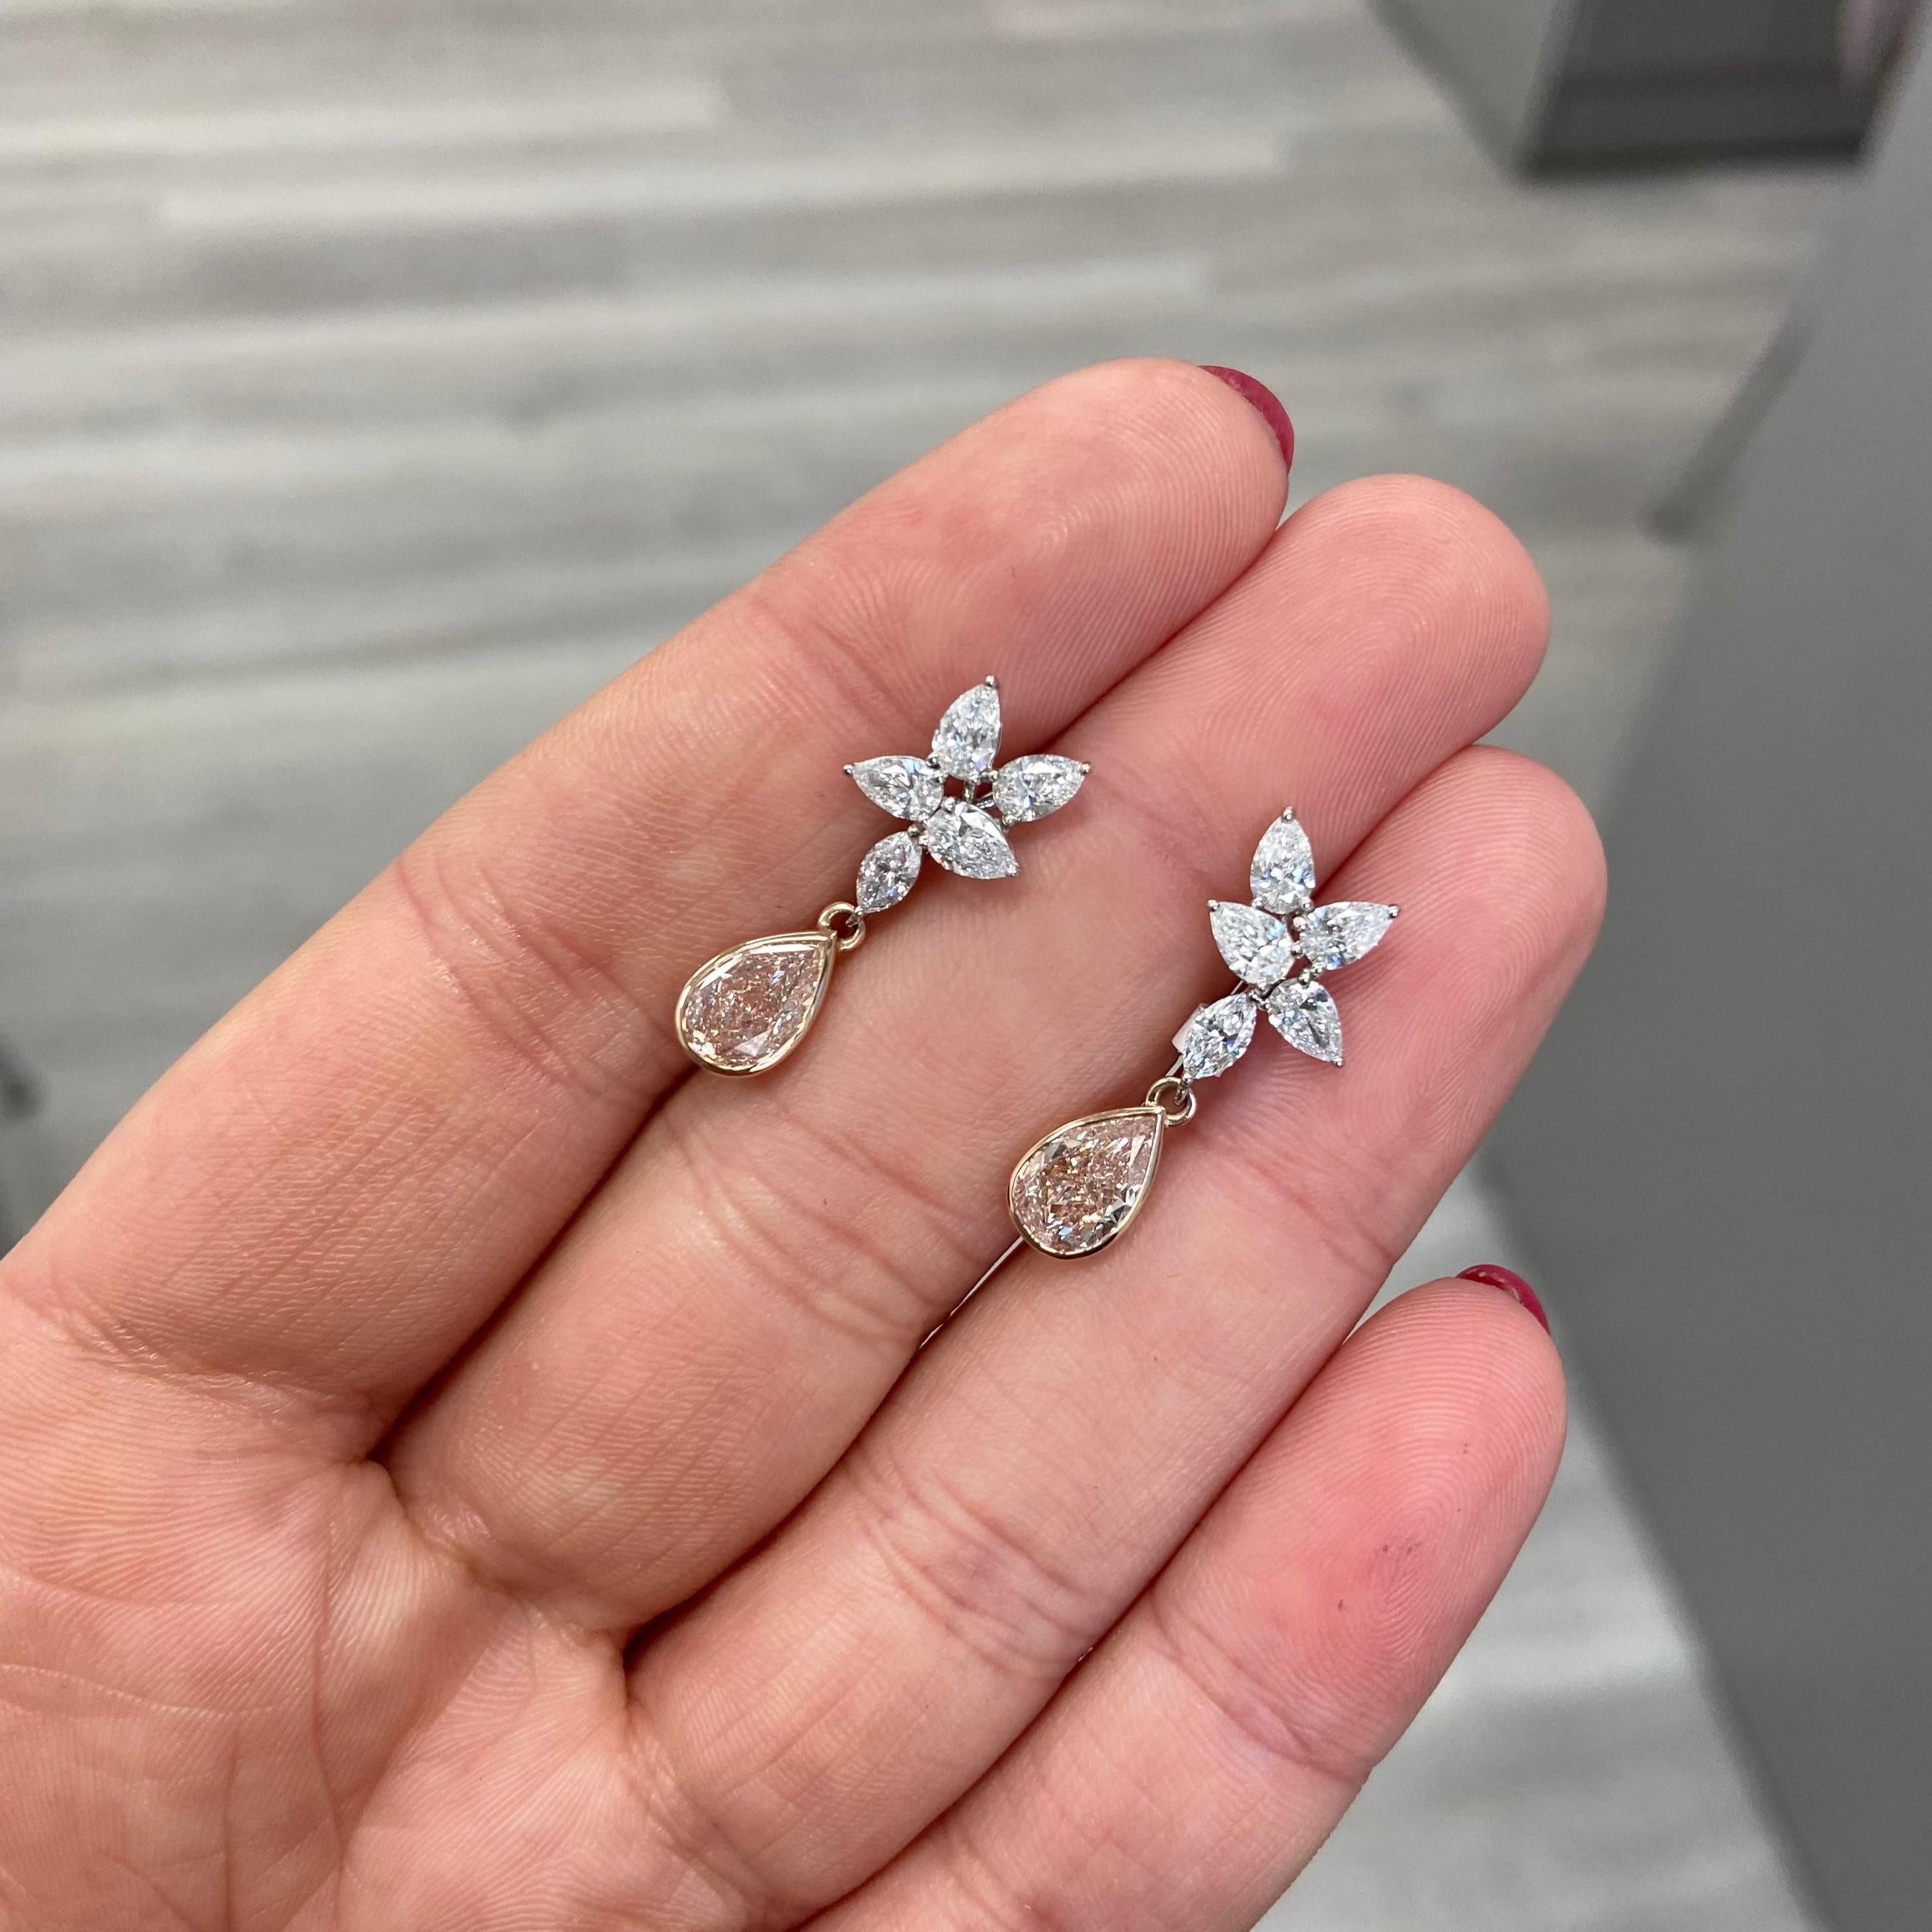 Sensational earrings with 1ct each GIA certified Fancy Light Brownish Pink Pear shapes set in a regal drop style with a cluster of colorless pear and marquise cut diamonds 
The pink pears are set in a rose gold bezel and face up with a pure pink